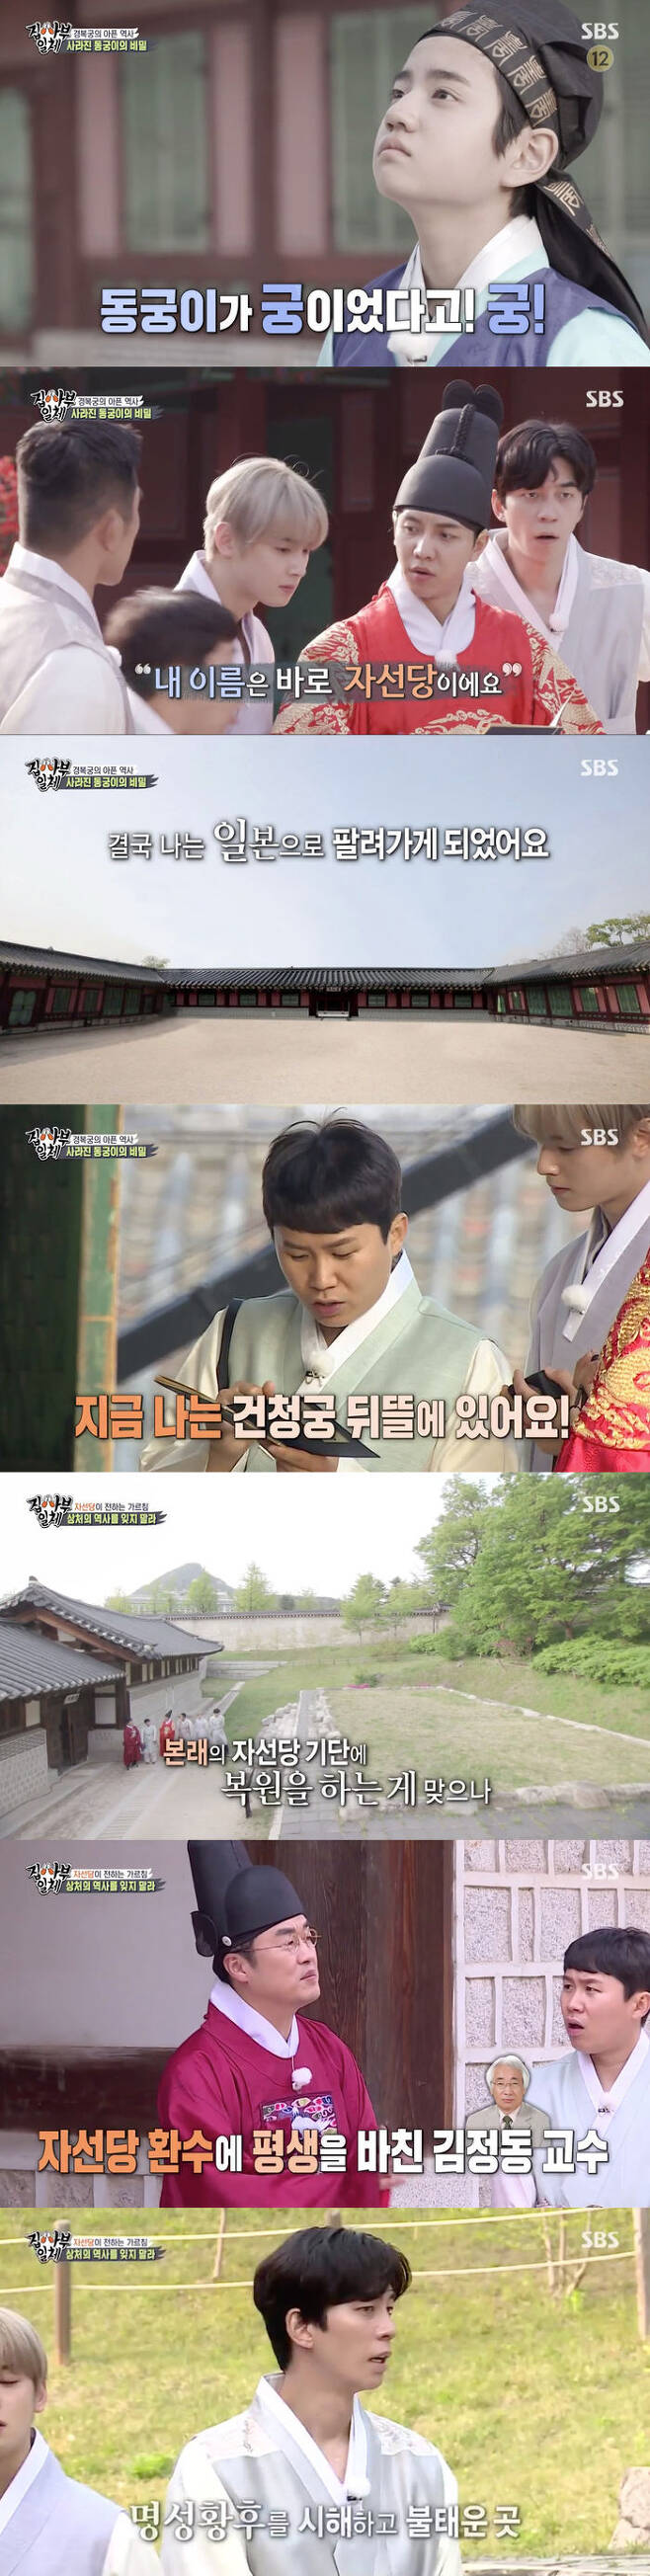 The Narrative of Gyeongbokgung, which we didnt know, was released.On SBS All The Butlers broadcasted on the 2nd, there were disciples who listened to the Narrative of Gyongbokgung by looking at every corner of Gyongbokgung with Goodbye My Princess.On the day of the broadcast, Disciples found out that he had disappeared while having a good time with Goodbye My Princess.And they were given a mission to find Goodbye My Princess by giving them a clue to Goodbye My Princess diary.Goodbye My Princess, who must be in Gyongbokgung, revealed her identity through Goodbye My Princess diary.Goodbye My Princess was one of the courts of Gyeongbokgung, built in Baro 1427; this was built for the stay of Cesar and Cesarbin, the Baro Charitable Party.Disciples recalled that Goodbye My Princess had named the Charity Party as the favorite place in Gyongbokgung.And then I went to the charity for another clue.The second Goodbye My Princess diary found at the Charity Party contained shocking content.In 1895, Empress Myeongseong, the mother of the tax collector, was murdered and later the Japanese sold the pavilions of Gyongbokgung to the auction, and in the process, the heart of Gyeongbokgung, the Geunjeongjeon, took a long period and the charity was sold to Japan and was abandoned in the backyard of the house of Japan, Okura.In particular, Japan sold 469 buildings of Gyeongbokgung for auction and auction, and it was known that there were only 40 buildings left, which shocked everyone.Disciples, who had learned so far, headed for the Geunjeongjeon with a mixed heart, and there they found a third Goodbye My Princess diary.Over time, Goodbye My Princess became part of a trail covered in the grass forest, and after a long effort by a Korean, it was reported that he returned to Gyoungbokgung in 80 years.And now Goodbye My Princess is in the backyard of the Guncheong Palace, and Disciples soon headed to the backyard of the Baro Guncheong Palace.However, only empty estuaries remained in the backyard of the palace, raising doubts.At this time, the officer returned and he told us the Goodbye My Princess, the Narrative we did not know about the charity party.The backyard of the Palace is the Baro Charity Partys Yugyu, stone stone, which originally said that it should be the foundation of the Charity Party on this stone, but it can not be done.In the process of auctioning the Gyeongbokgung pavilions by the Japanese imperialists, the Charity Party was reduced to a Japanese private art museum and was used in 1914 as the Joseon Pavilion.And the Charity Party, which was a wooden building due to the influence of the Kanto earthquake that occurred in 1923, was destroyed, and the only thing left was Baro in the backyard of the Palace.Also, the traces of the burned fire remained clear throughout the stone sheath that returned to Gyongbokgung, which made me sad.The charity party, which was subsequently sooted, smashed, broken and neglected, was discovered after a long effort and research by Professor Kim Jung-dong, a visiting professor at Tokyo University, and was returned in 1996.Professor Kim Jung-dong said, It is heartbreaking that one building is deeply hurt and is in Japan as if it is a hostage.The charity party has been returned. The charity partys reconstitution has also begun.However, the remains of the Charity Party were already unable to be reconstituted by the fire, and eventually they were forced to move to the backyard of the Palace.The officer, along with the sad Narrative of the Charity Party, informed another shocking fact.This place where the charity party was returned was where Baros past Empress Myeongseong was buried and burned.Many people know only about the Empress Myeongseong incident of the Guncheong Palace and miss the remains of the Charity Party, the officer said.He also said, It is a history that was erased until the party returned, but it is returned to Gyongbokgung and the Narrative is reconstitution. It is the teaching of Gyeongbokgung Master today that it is a mission to restore the lost history and to give it to the future. It sounded like a big sound.